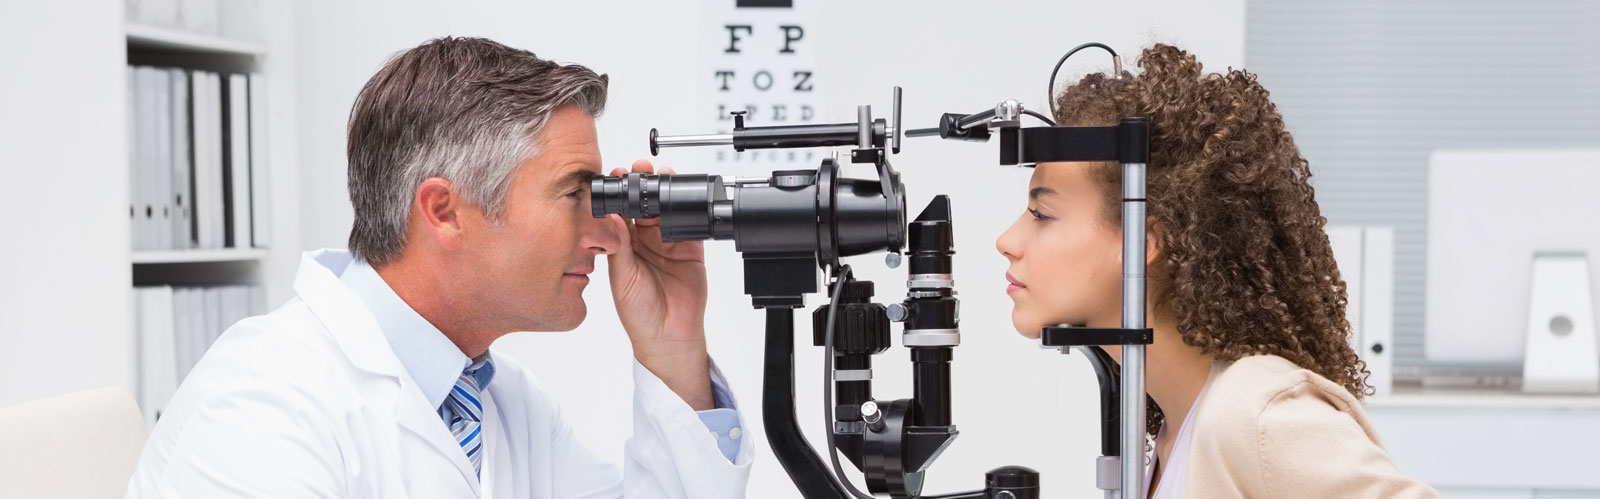 eye doctor checking a patient's eyes